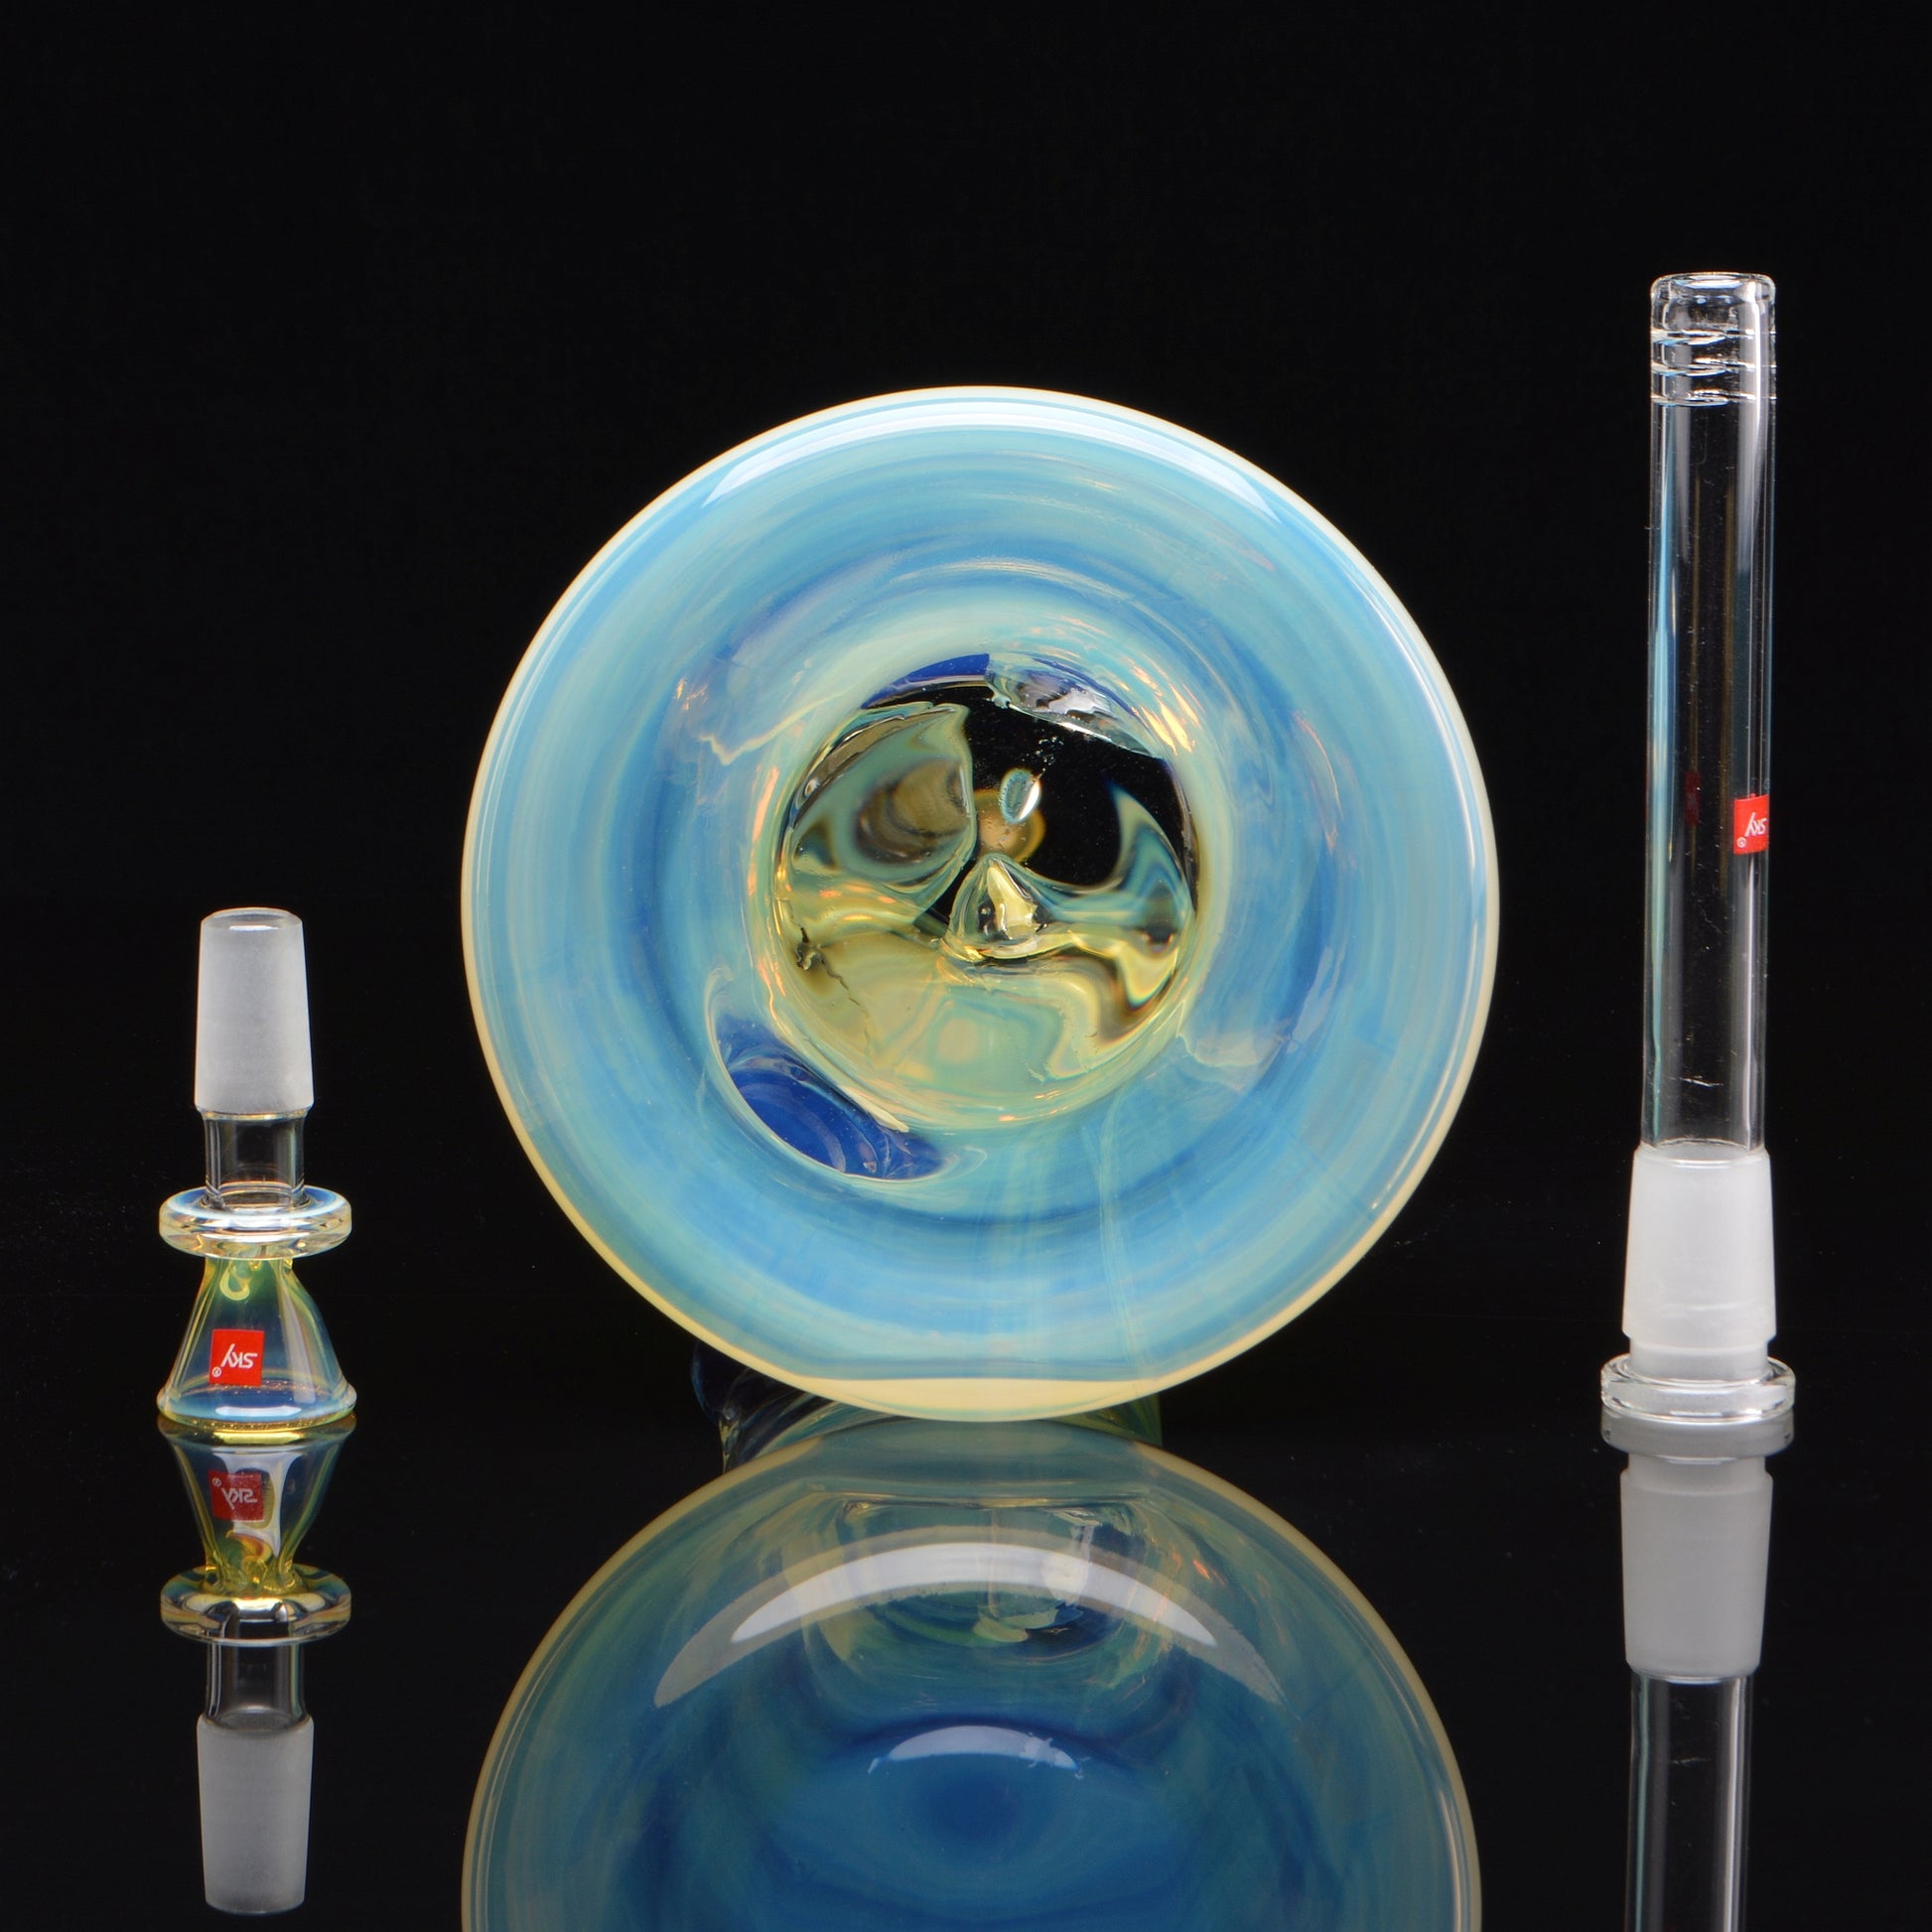 Base, bowl piece, and downstem